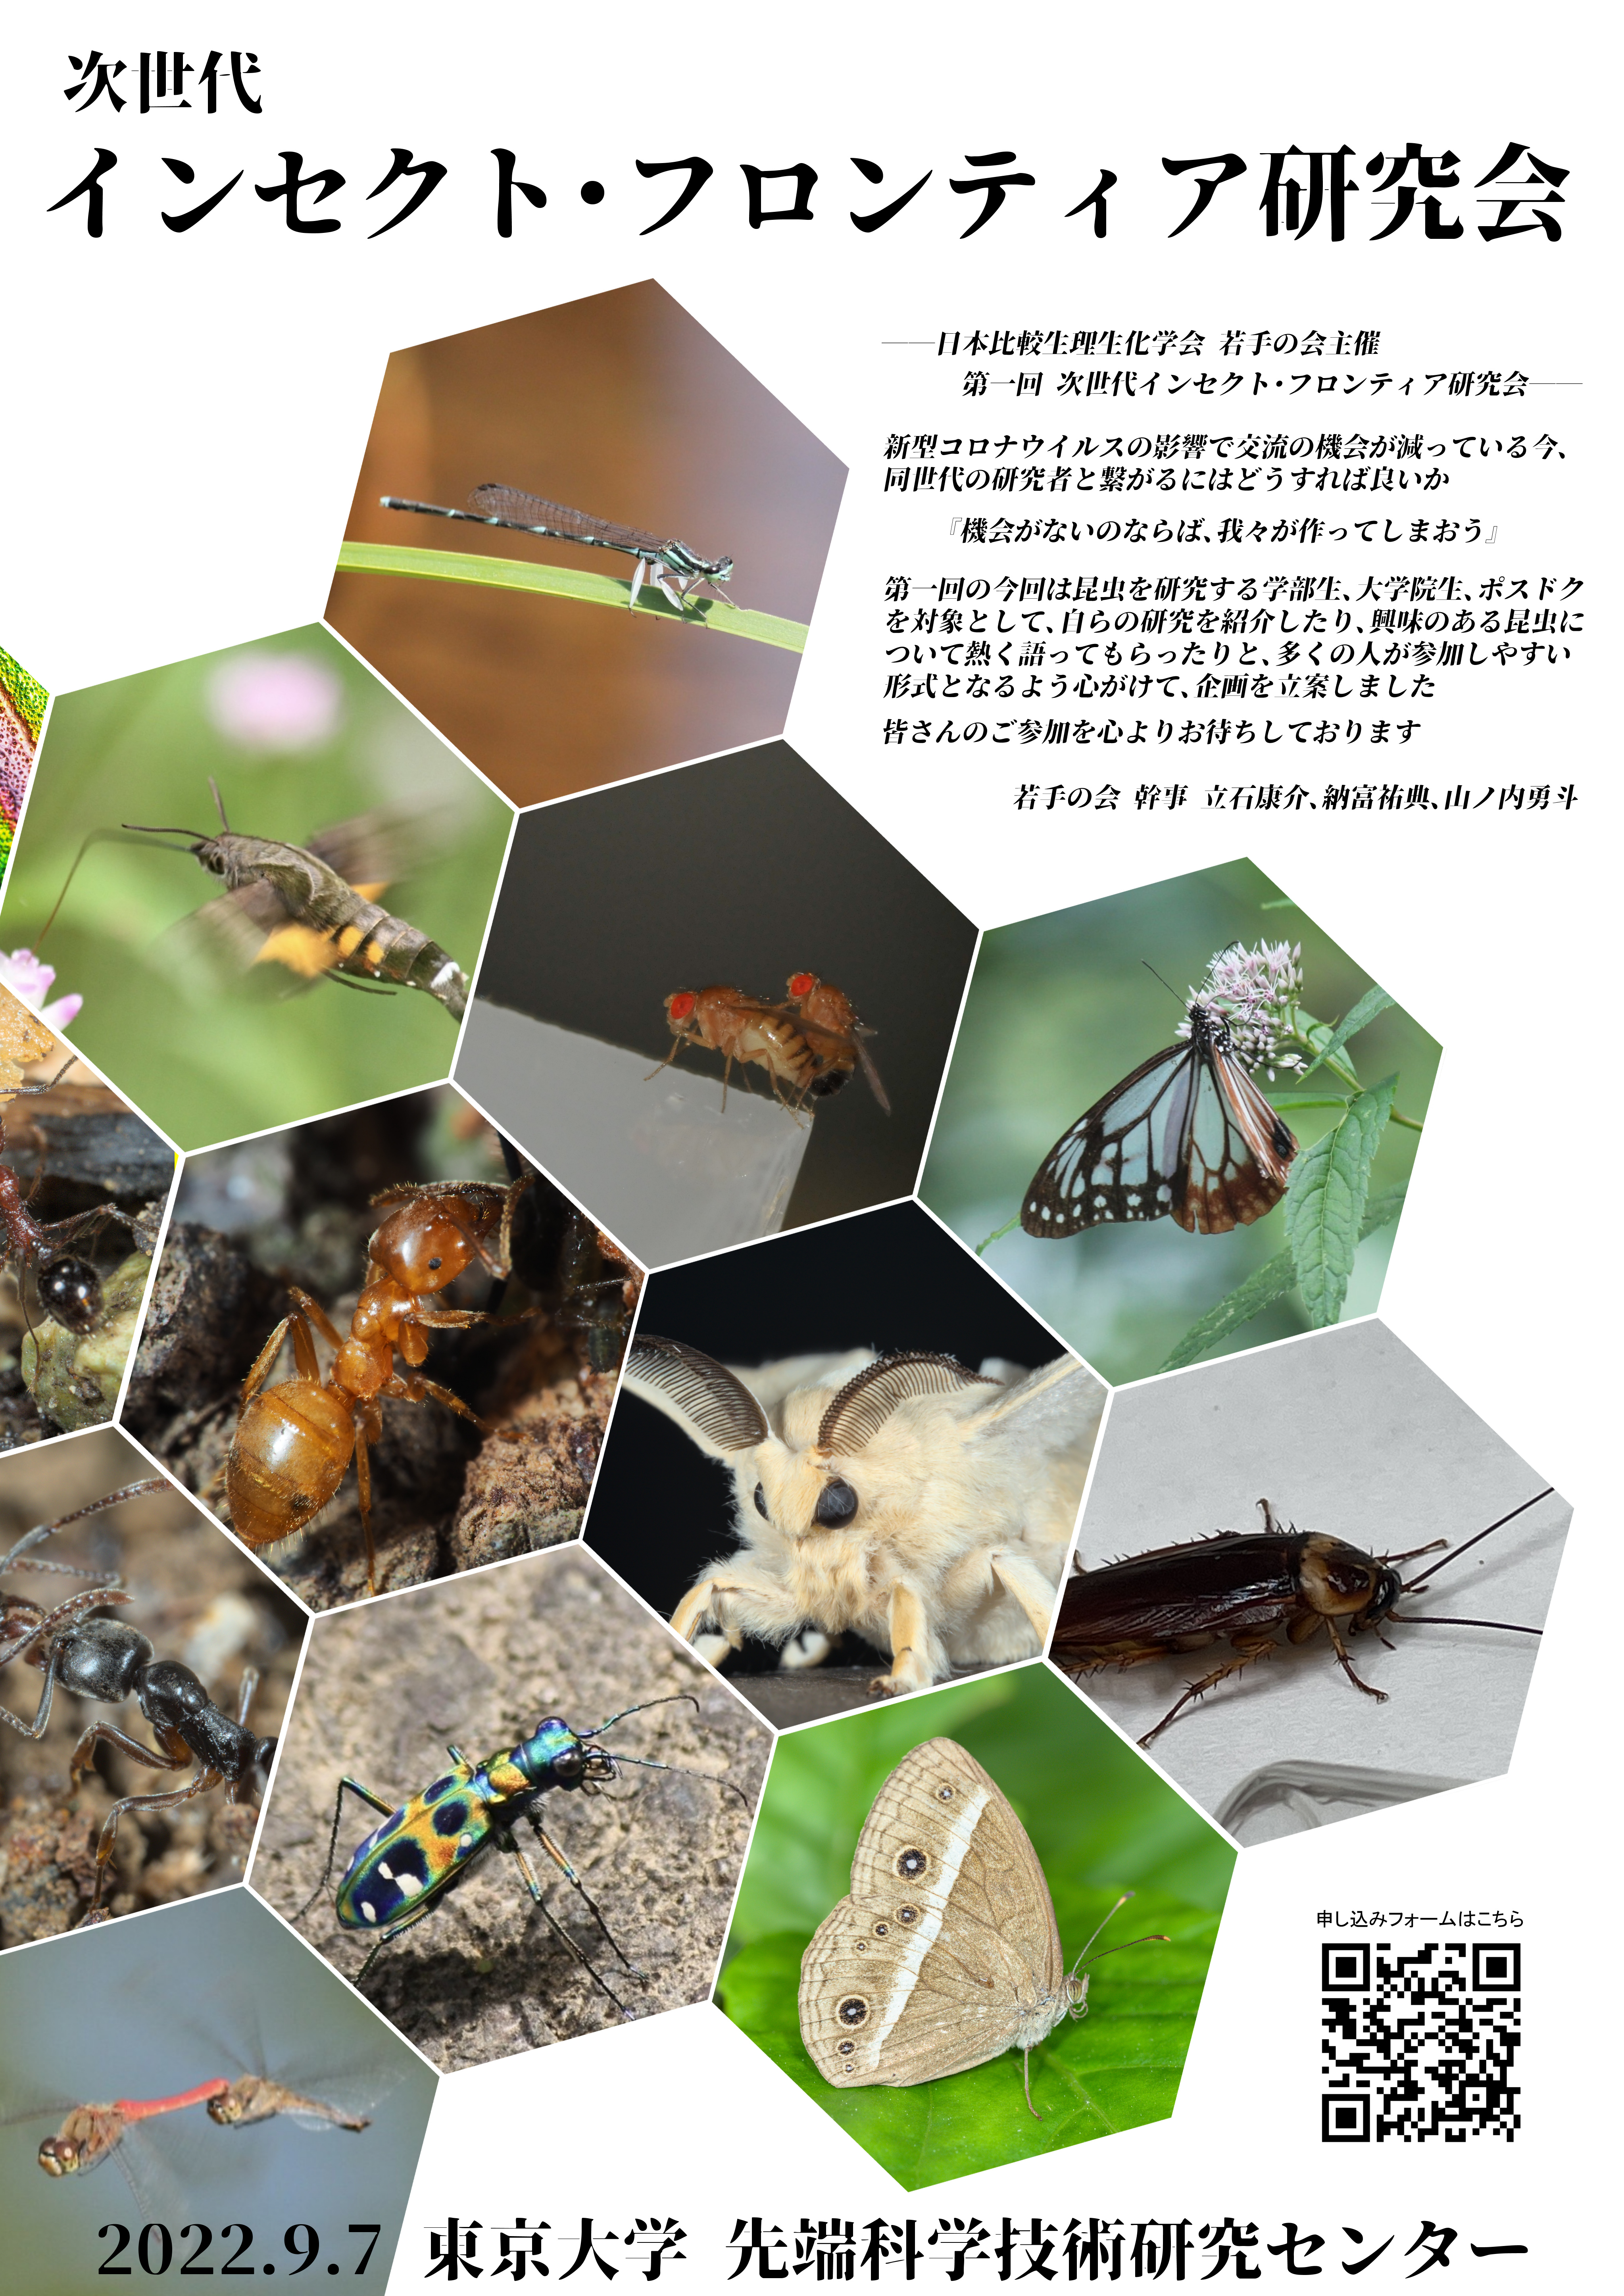 1st insect frontier poster a